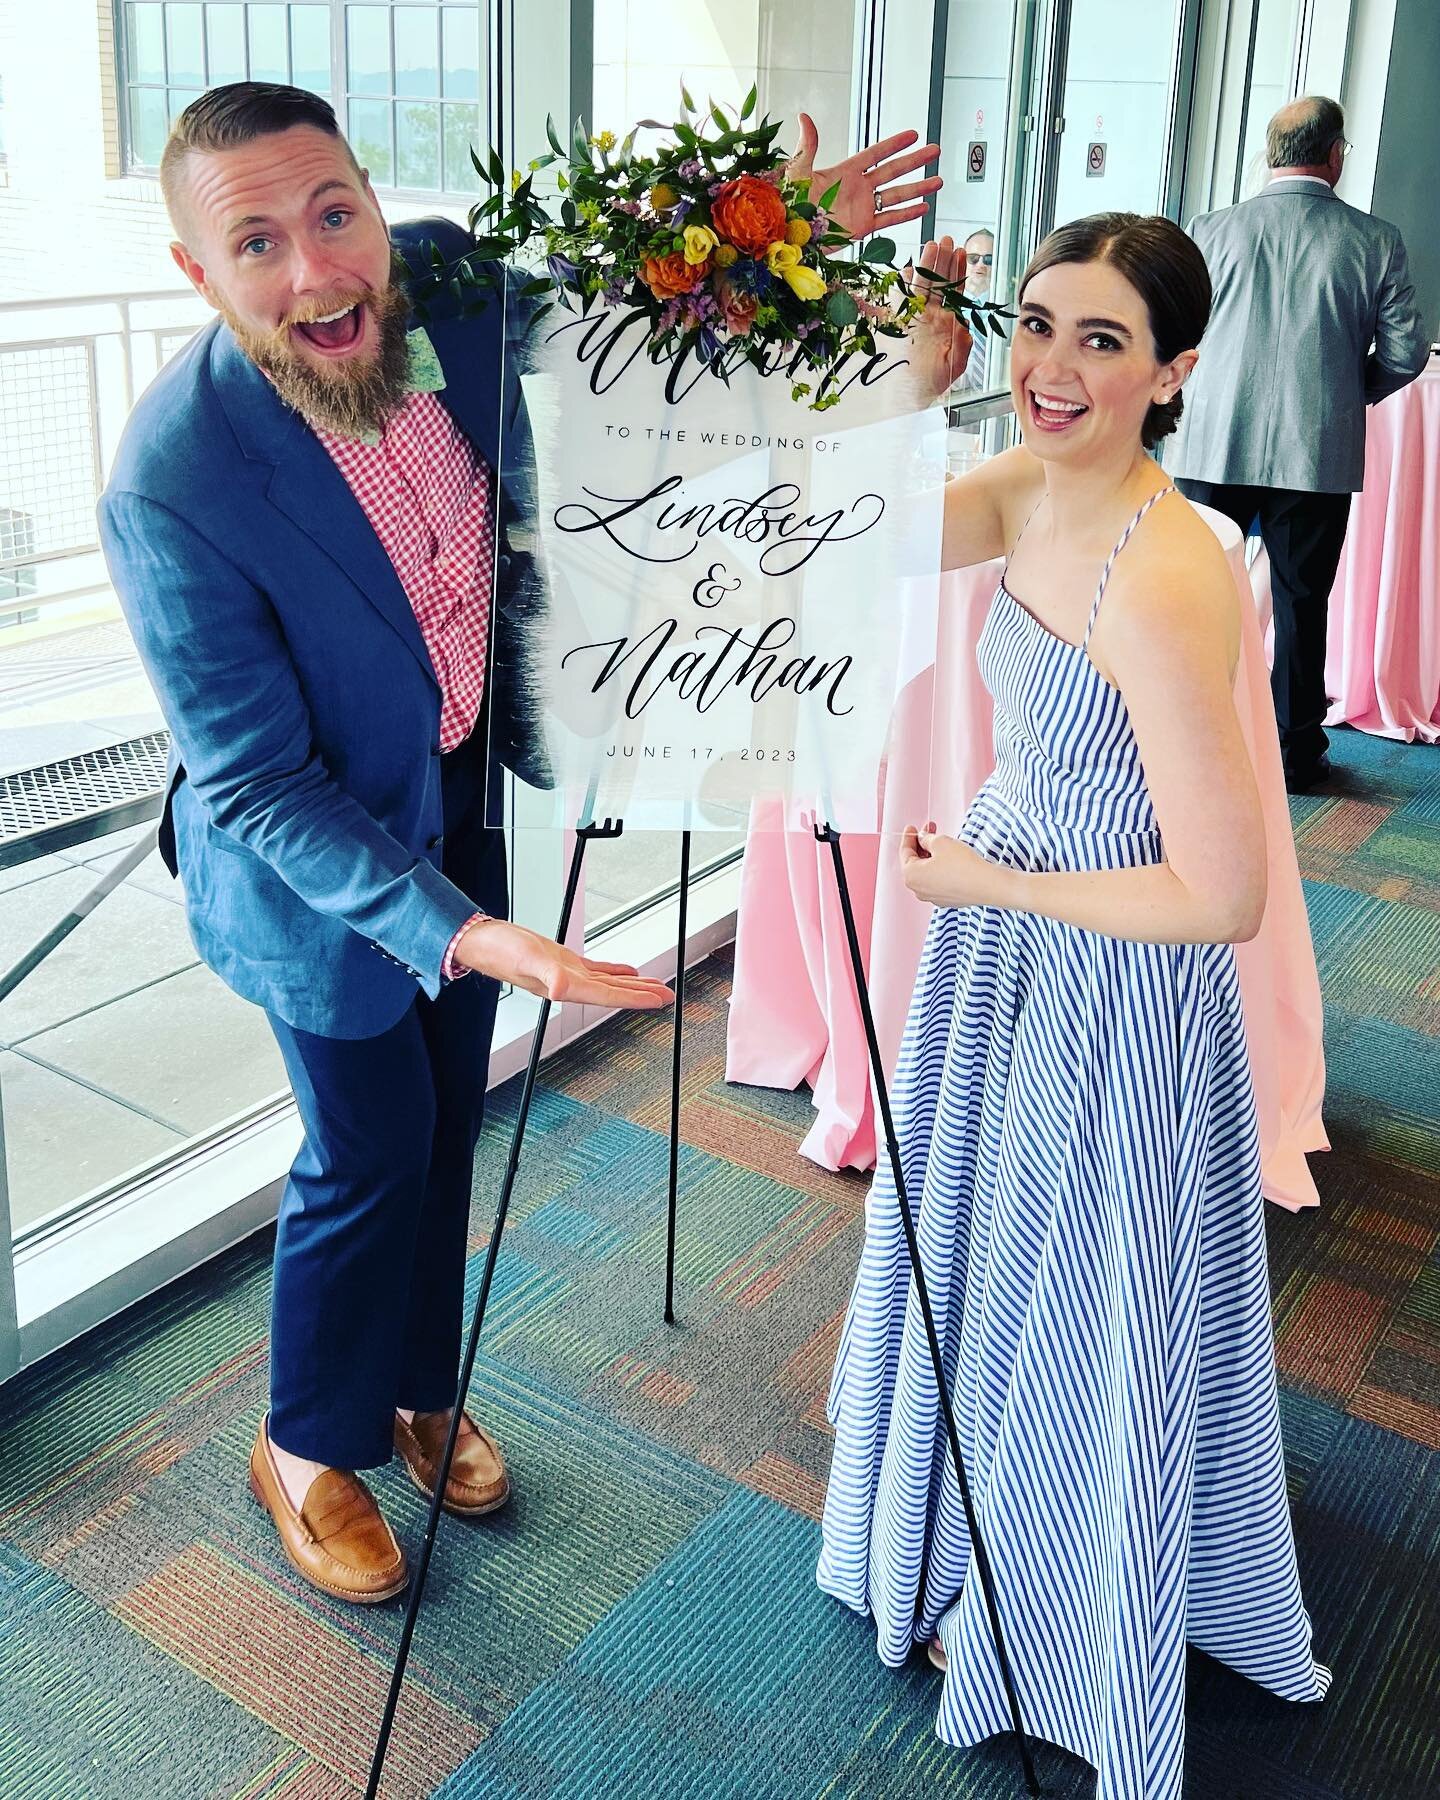 Congratulations to the happy couple! 🥂 We didn&rsquo;t get a picture with you, but your sign was lovely!